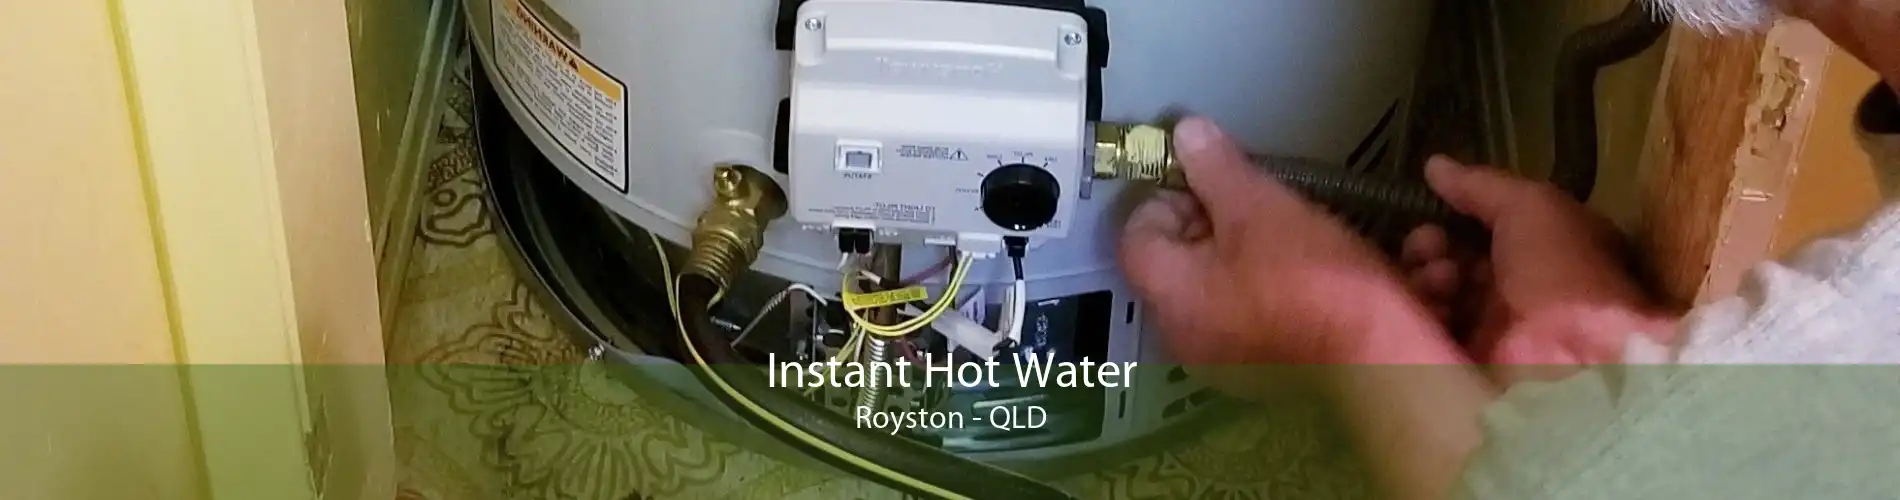 Instant Hot Water Royston - QLD